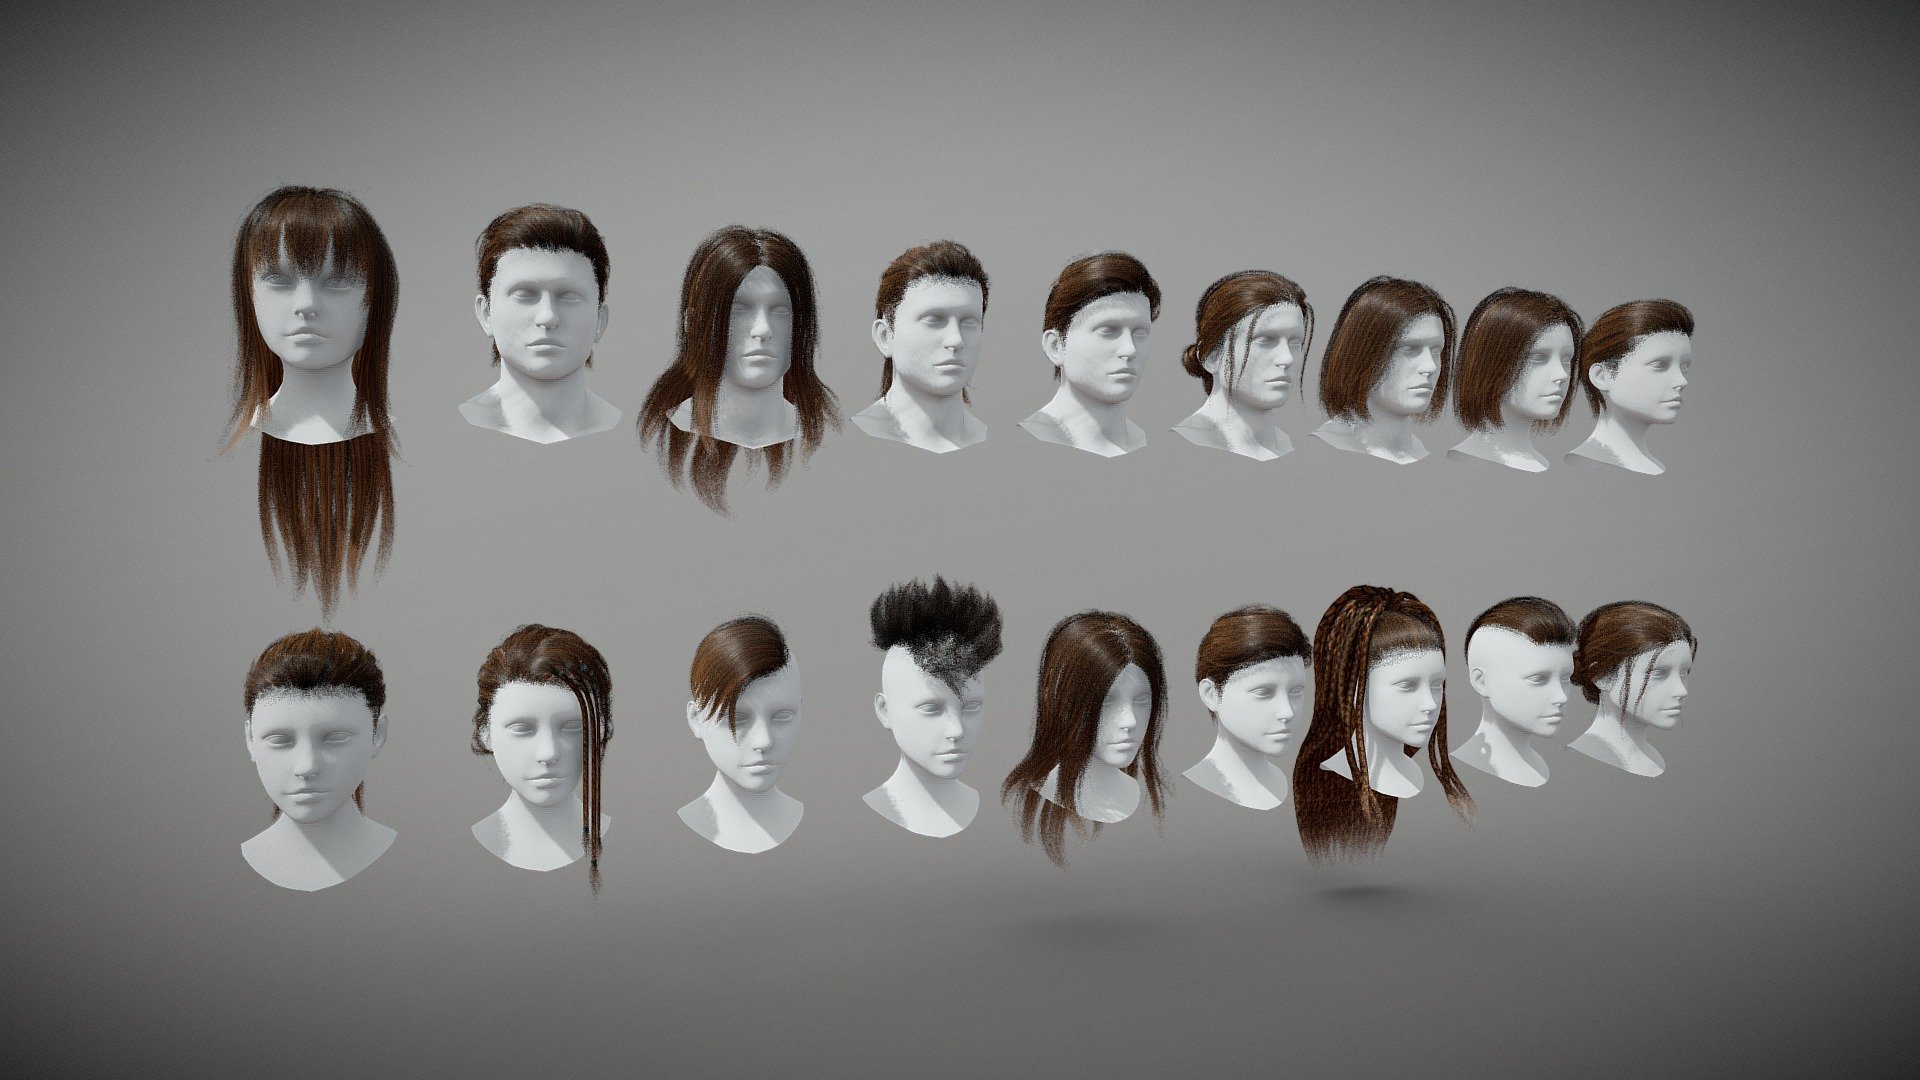 This package including Hair Card fit with G2 character Head
All Hairs rigged with own skeleton.
If you buying this package you will get: 
- HairCards rigged with own skeleton
- Hair Textures
Thank you for suppoting me! - G2 HairCard Collection 02 - Buy Royalty Free 3D model by Quang Phan (@quangphan) 3d model